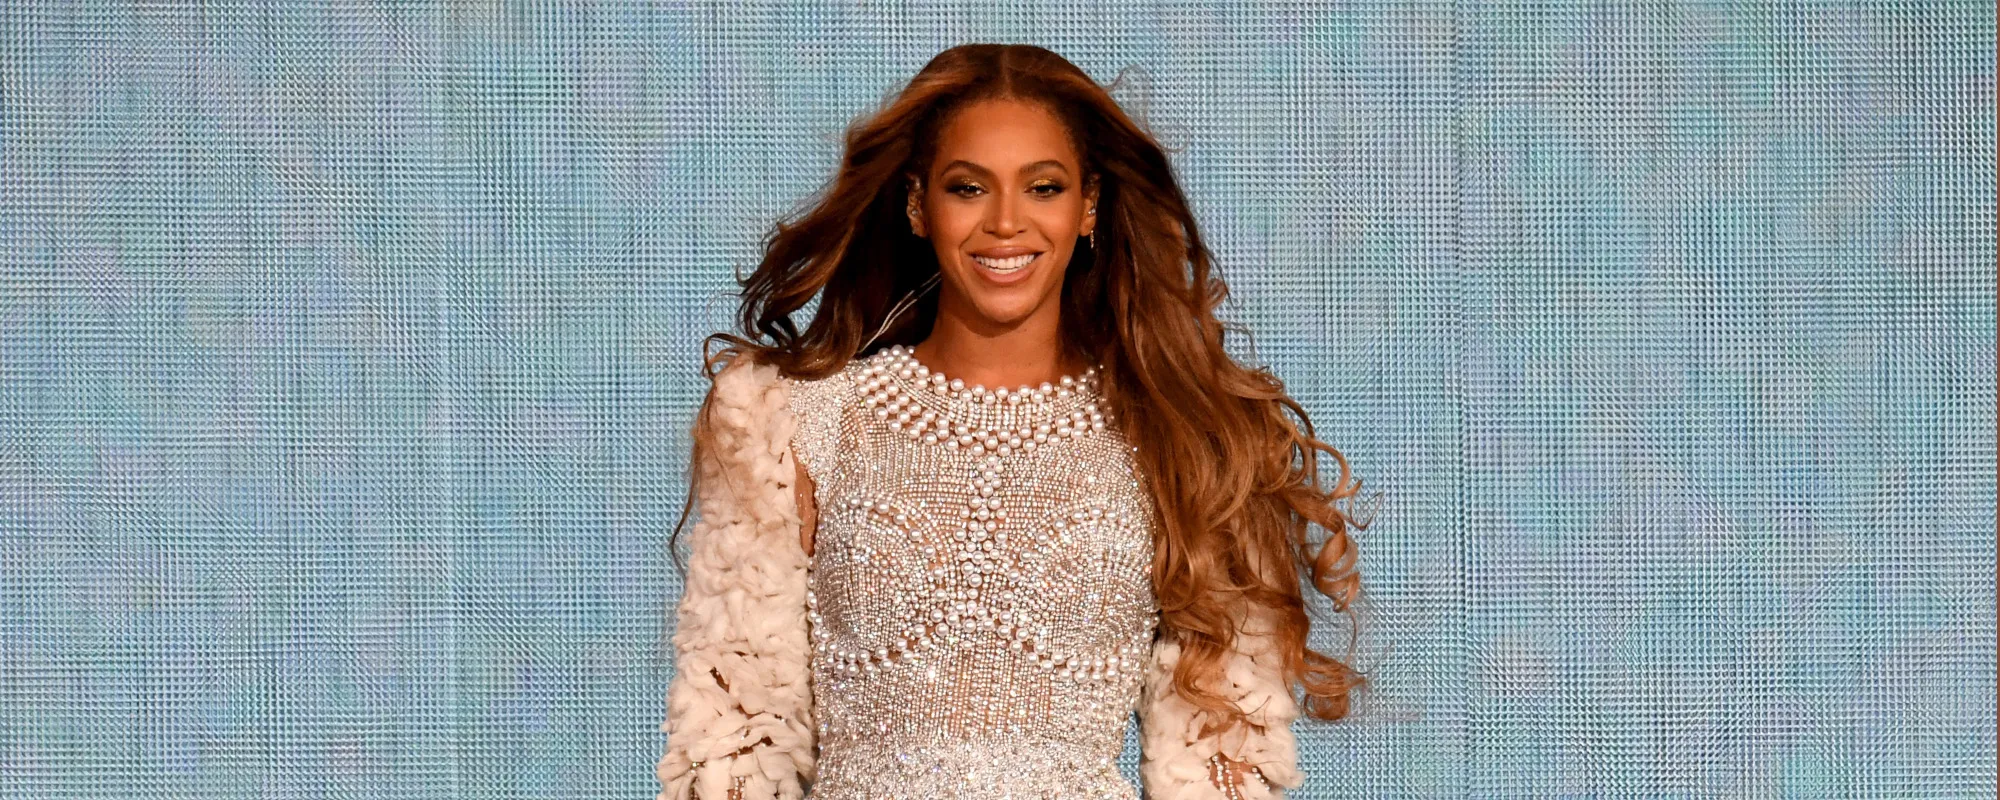 Beyoncé Shares Touching Mother’s Day Tribute at Renaissance Tour Stop in Brussels